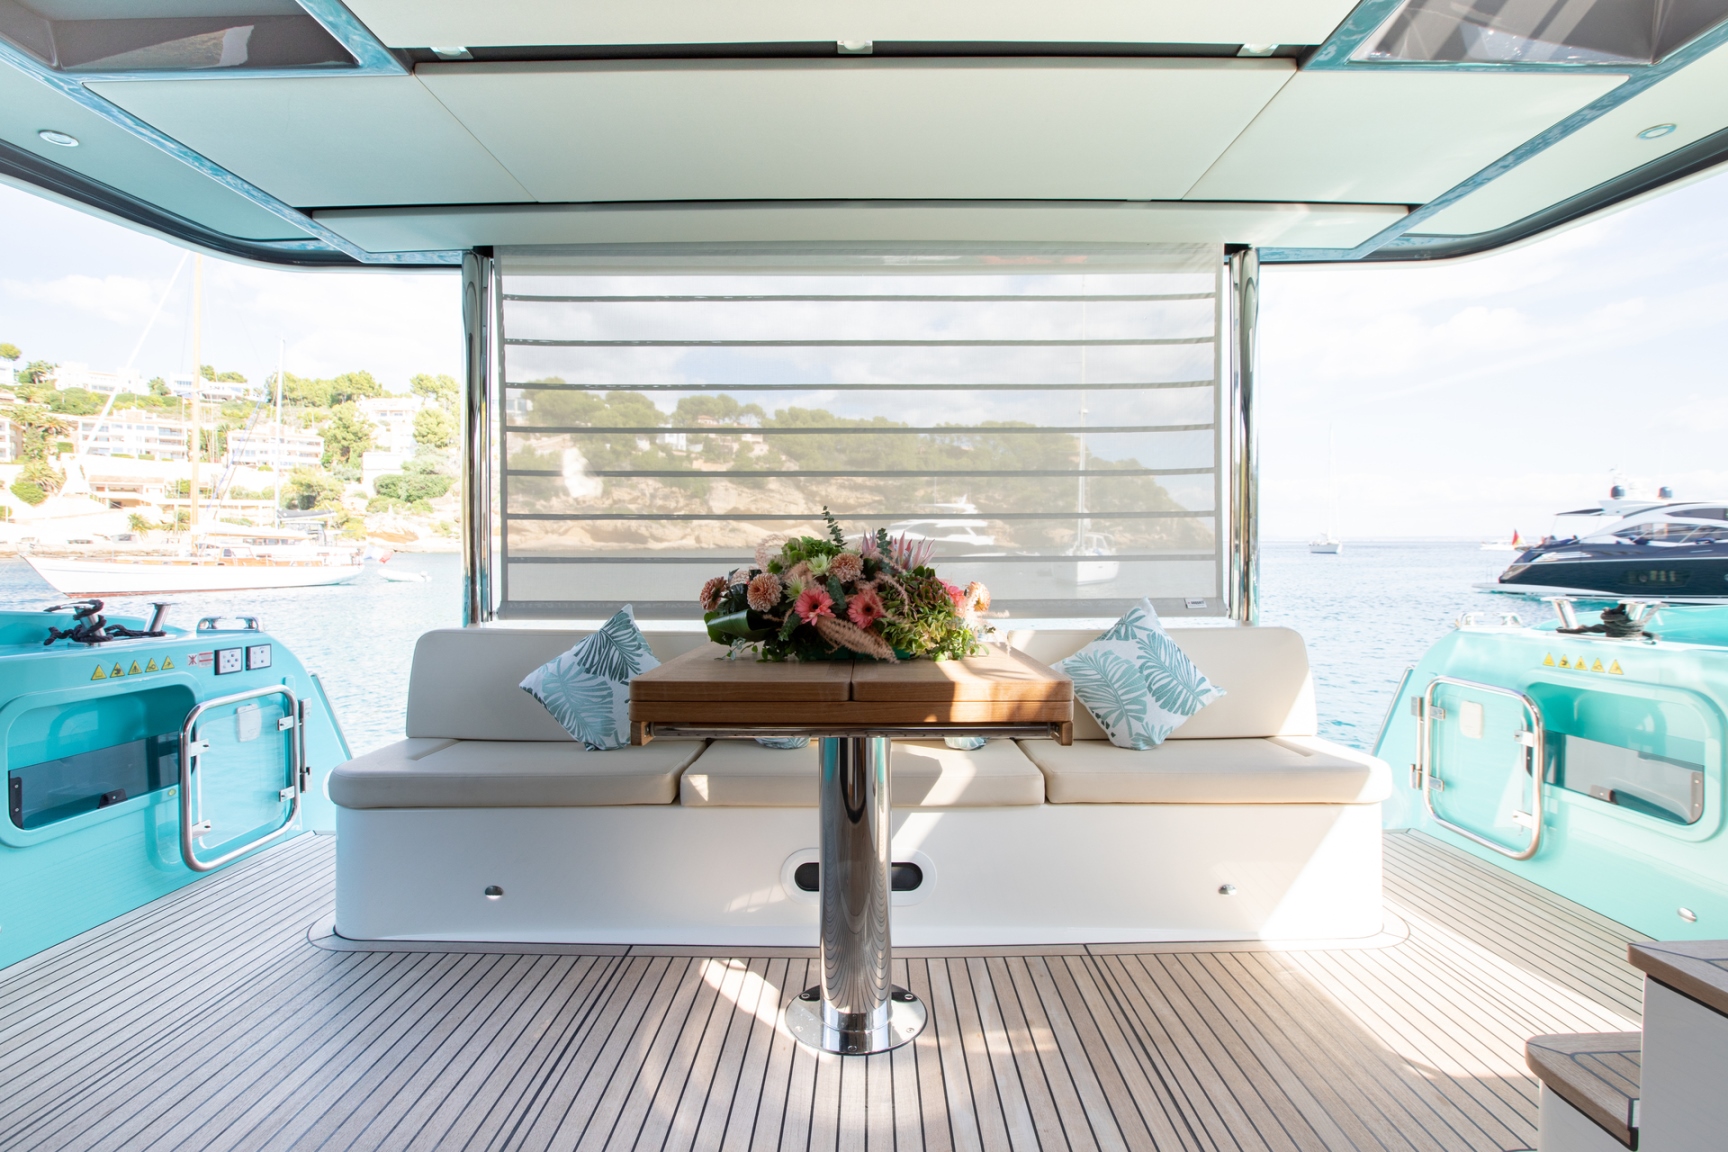 Outdoor deck dining area with sea view Maybe yacht Yachtzoo